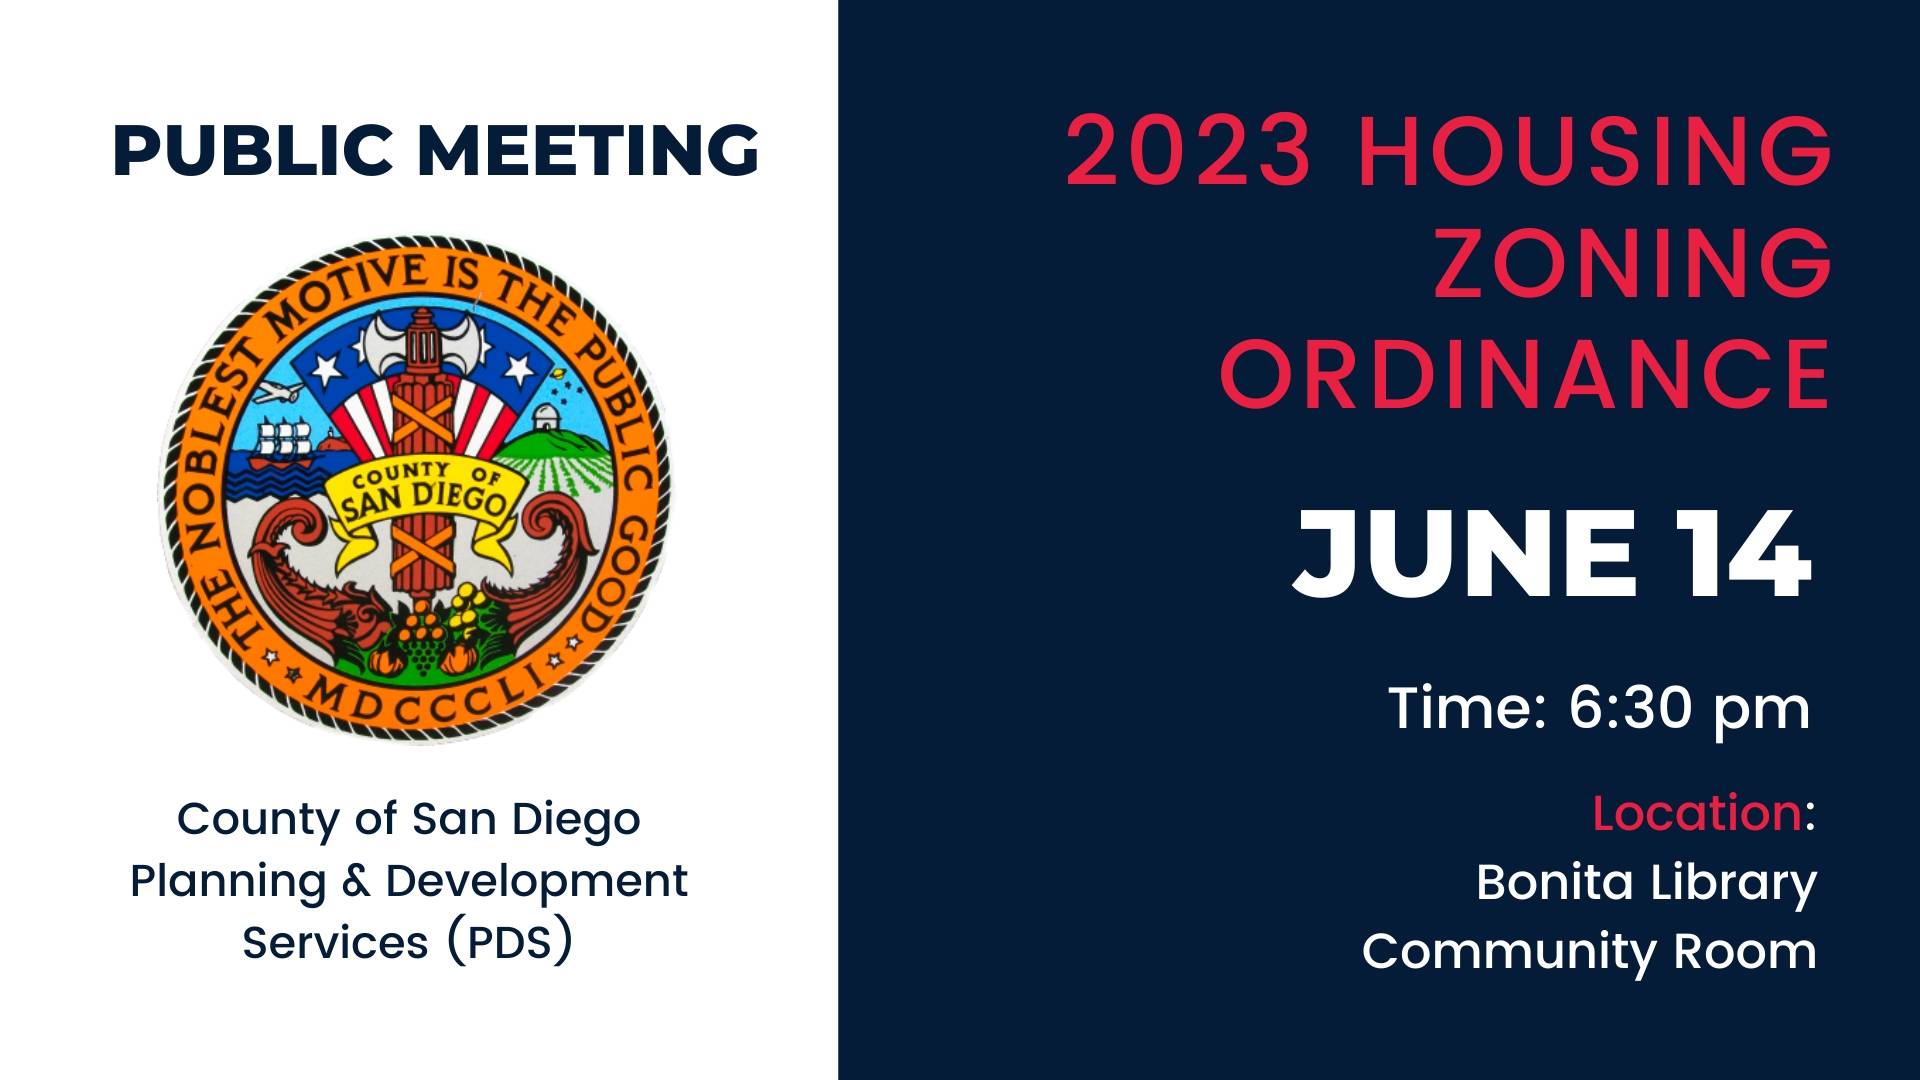 Housing Zoning Meeting! Upcoming meeting in Bonita on June 14th to discuss San Diego County housing zoning plans. Learn more.